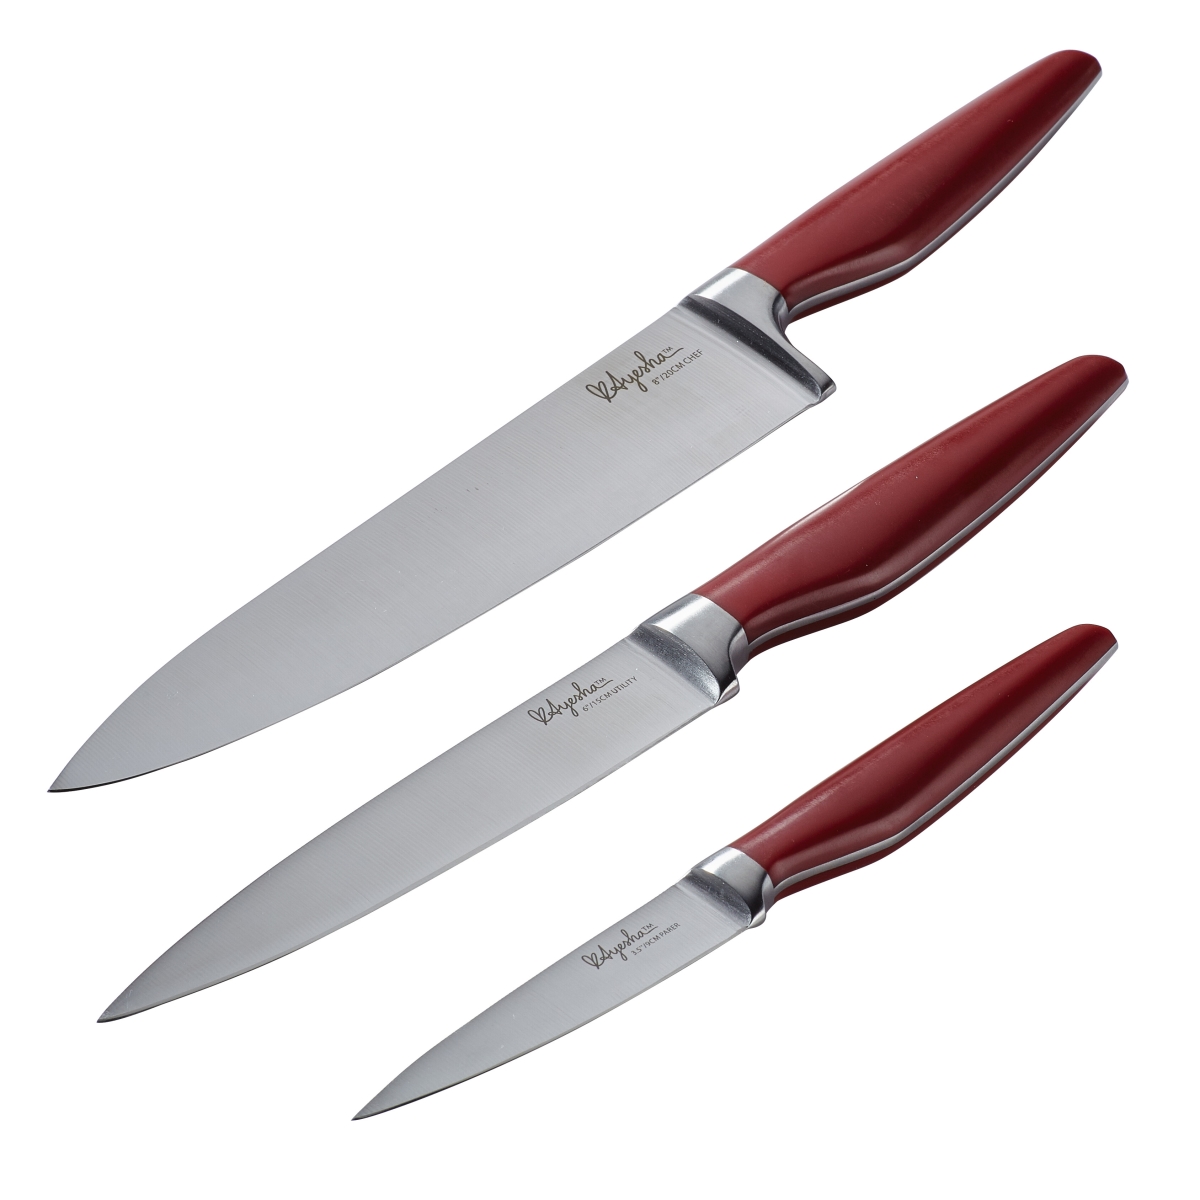 46954 Japanese Steel Cooking Knife Set, Sienna Red - 3 Piece